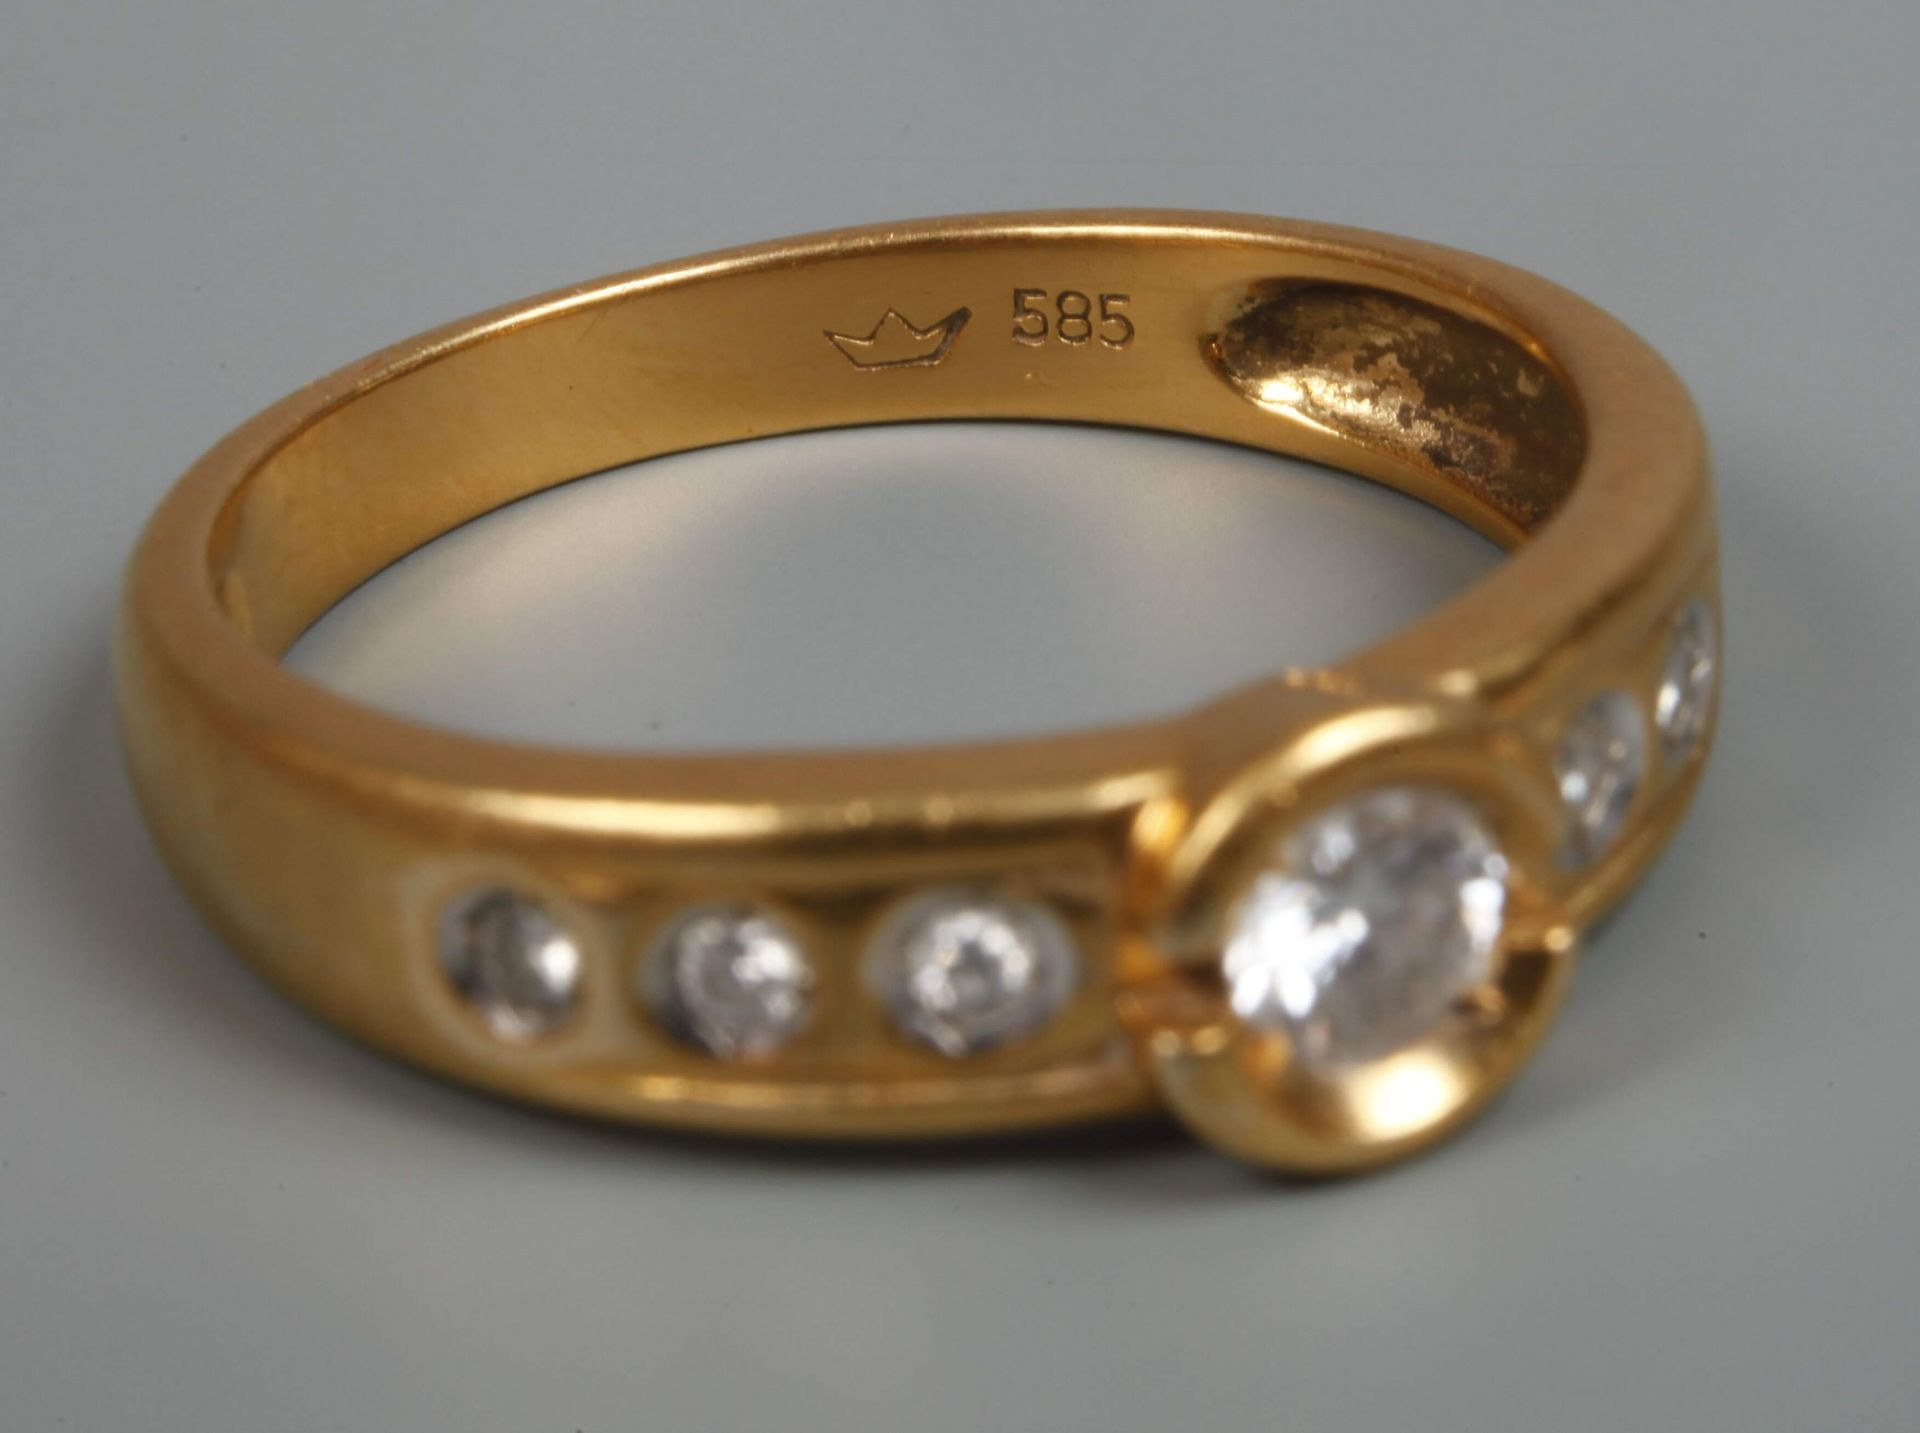 Ladies' ring with brilliants - Image 3 of 3